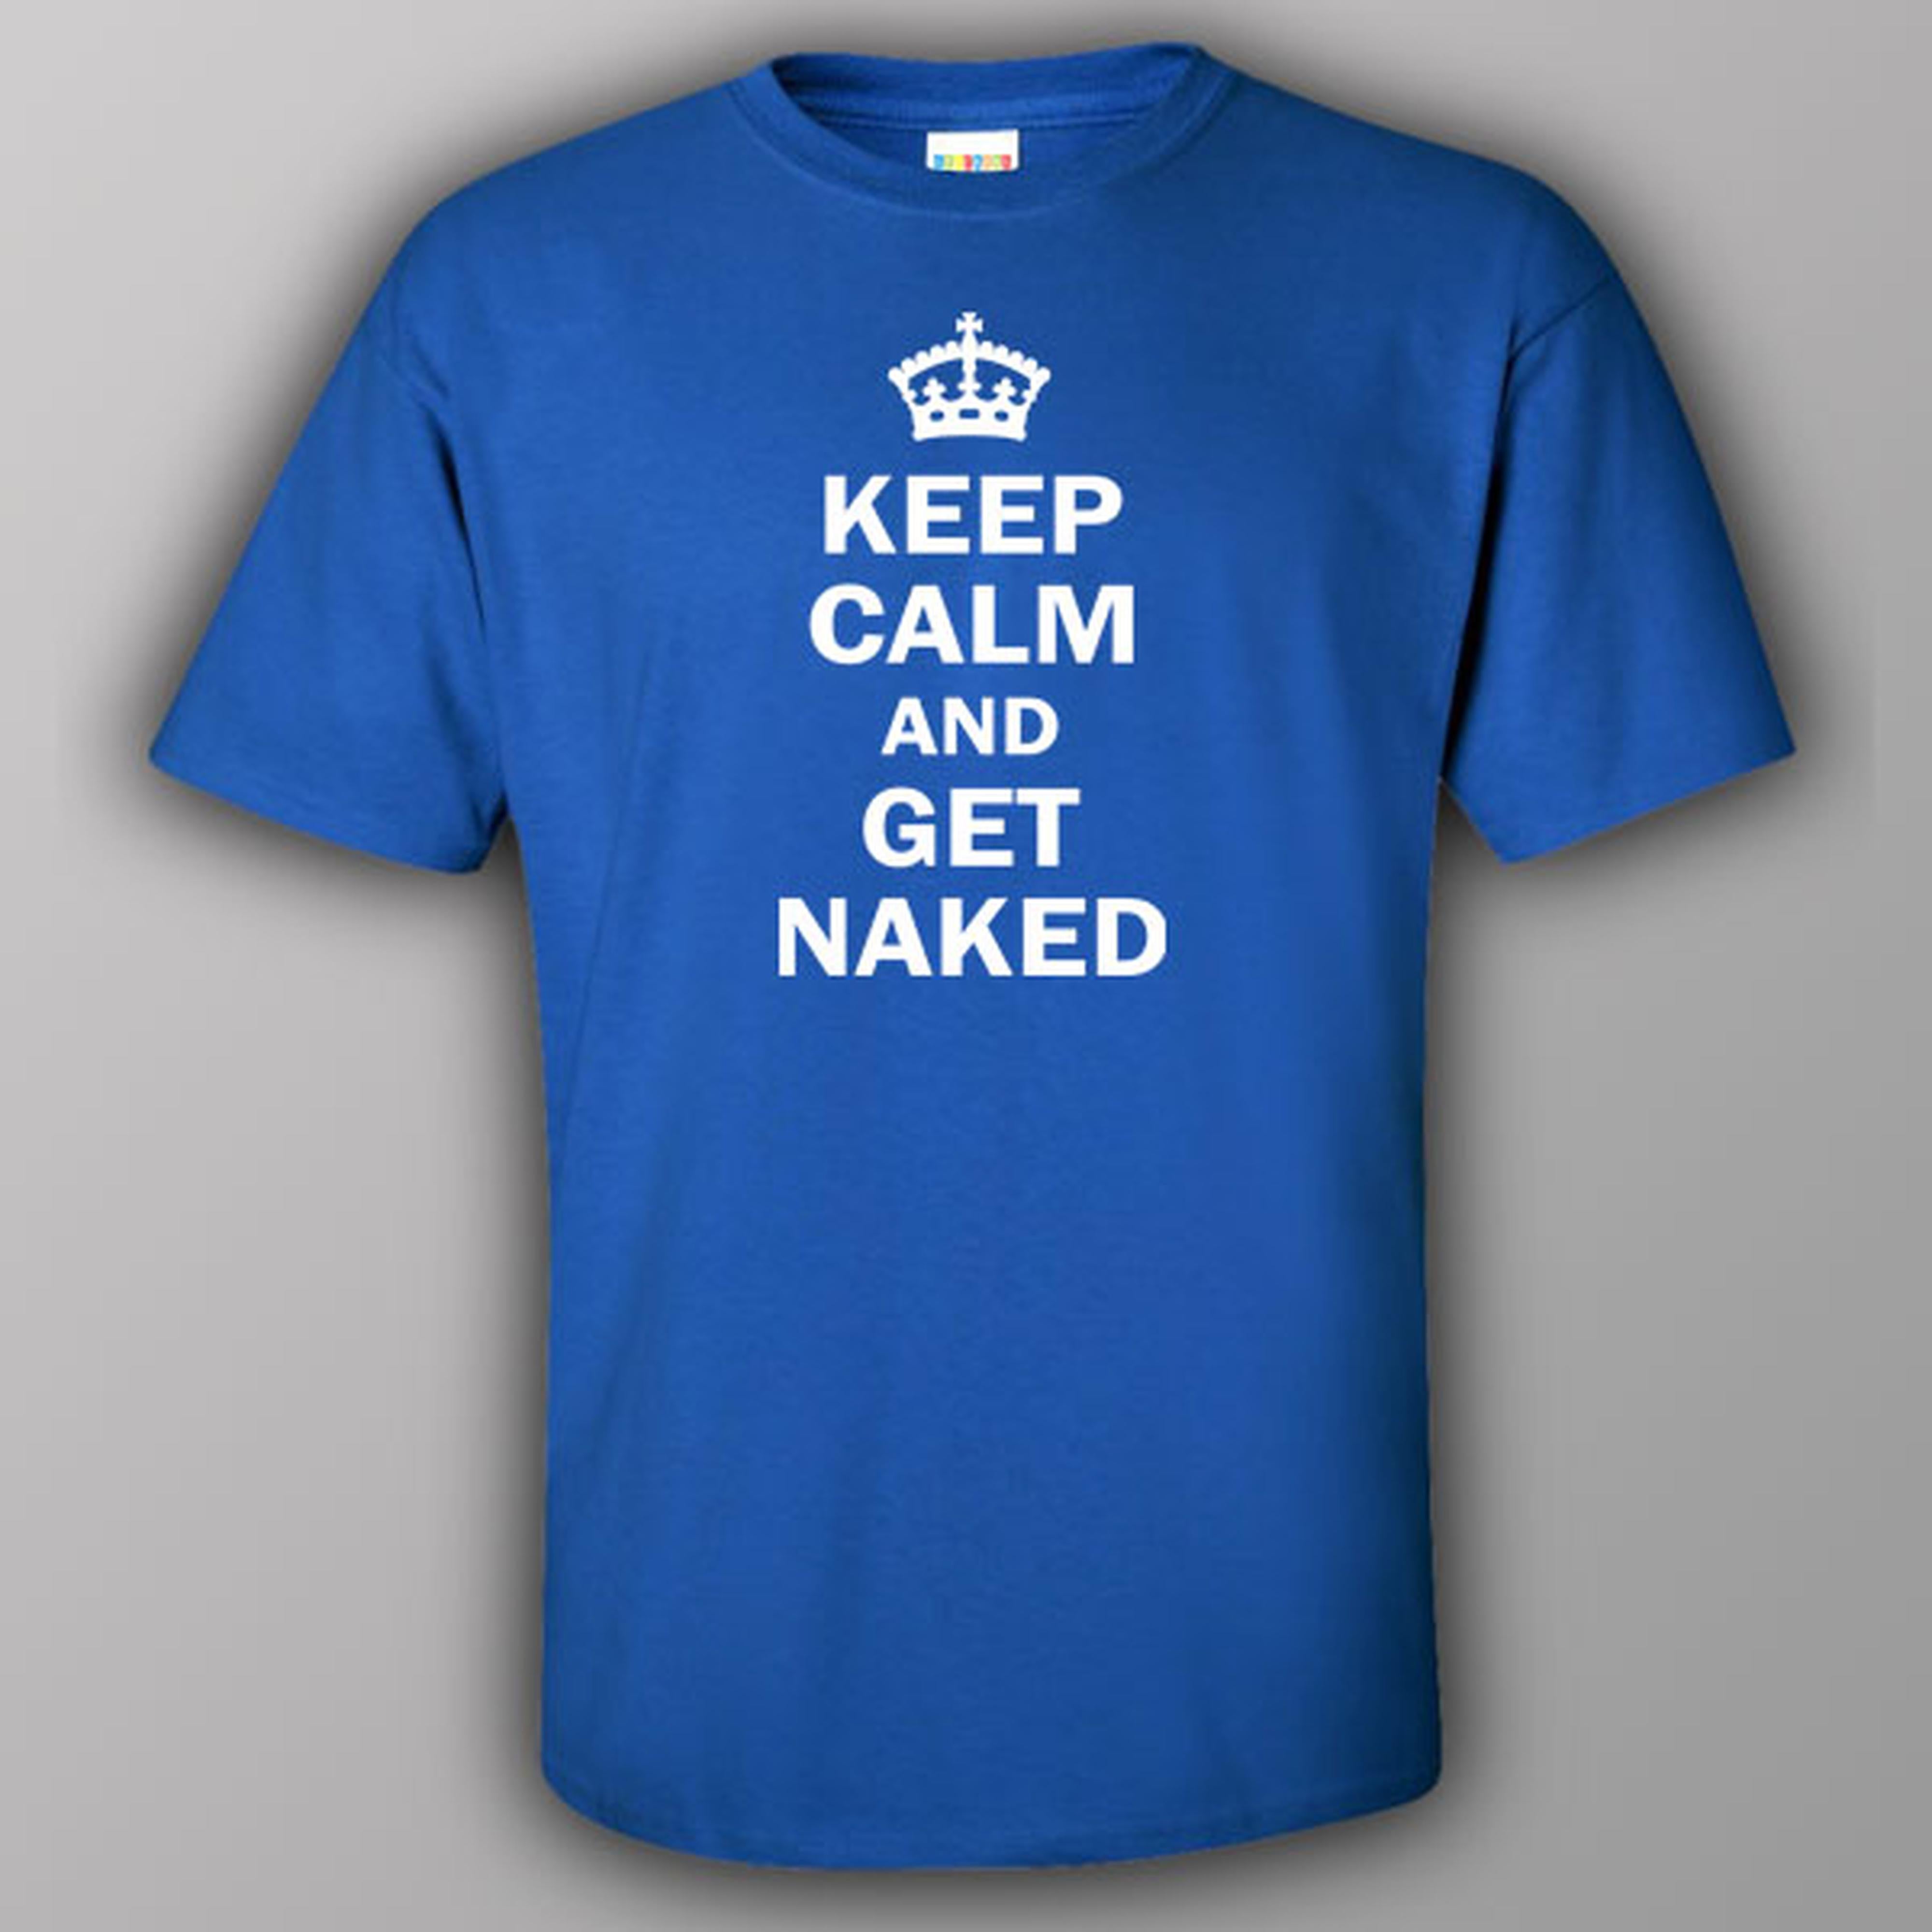 Keep calm and get naked - T-shirt